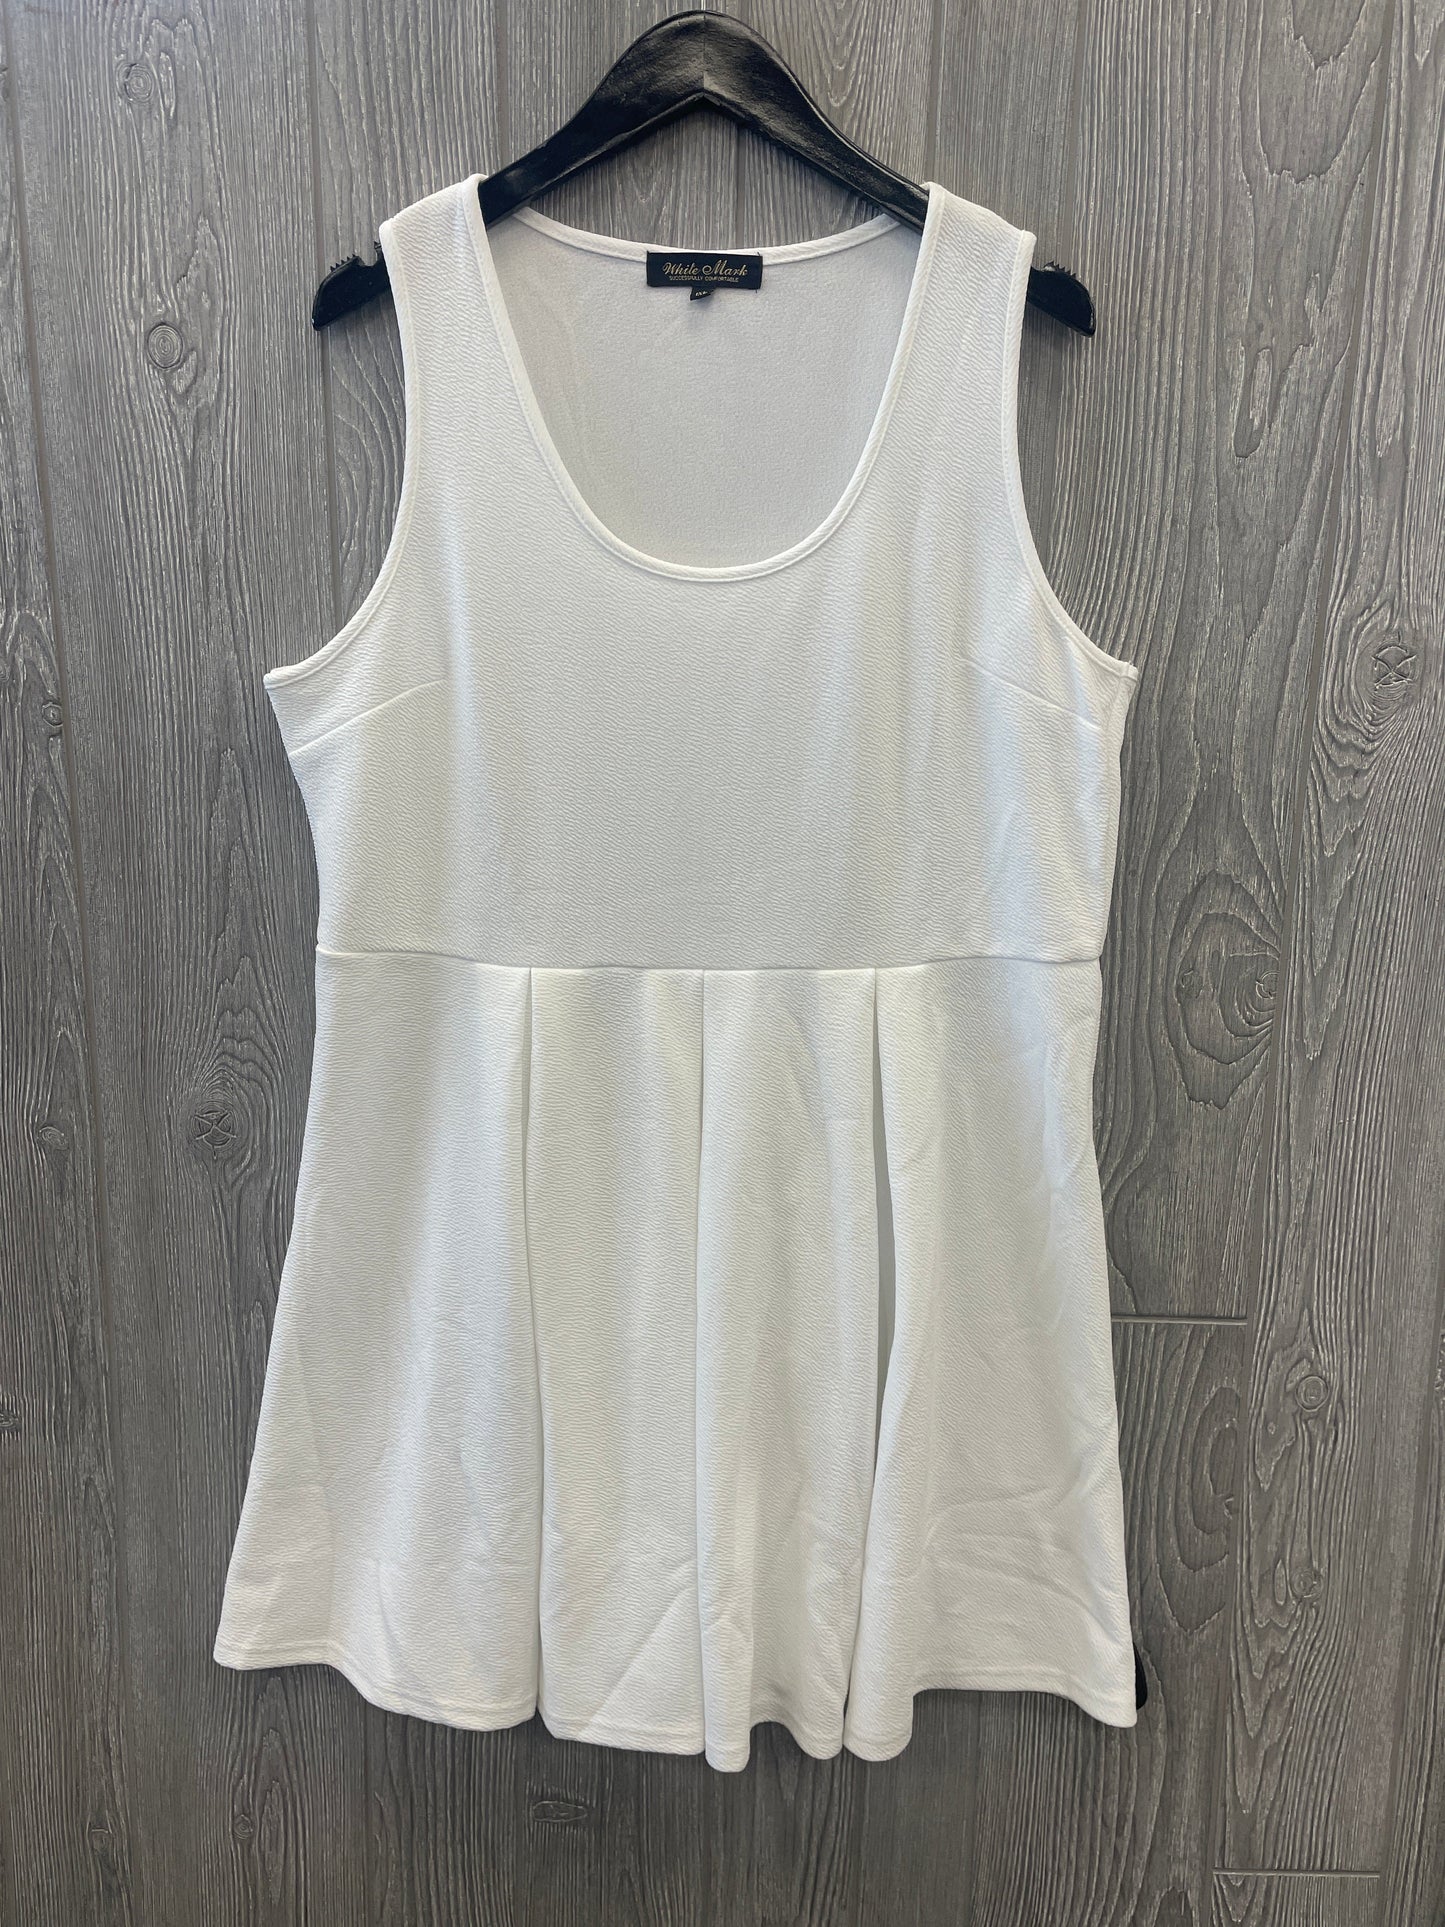 White Dress Casual Short Clothes Mentor, Size 1x